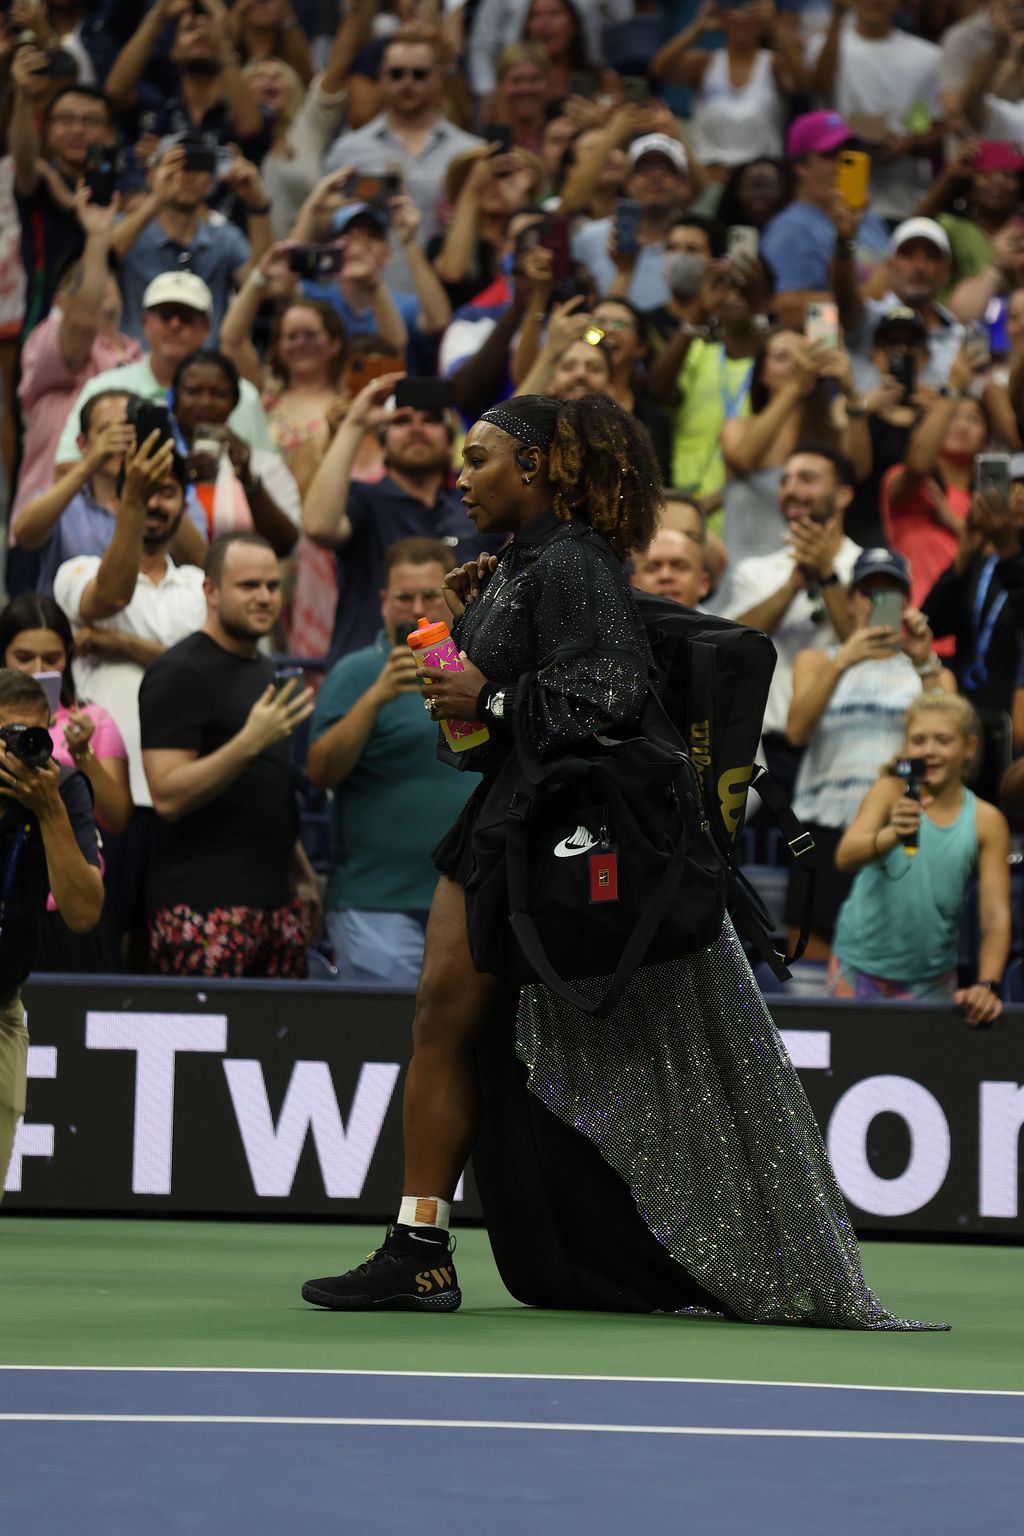 NEW YORK, NEW YORK - AUGUST 29: Serena Williams of the United States walks onto the court prior to her Women's Singles First Round match against Danka Kovinic of Montenegro on Day One of the 2022 US Open at USTA Billie Jean King National Tennis Center on August 29, 2022 in the Flushing neighborhood of the Queens borough of New York City. (Photo by Al Bello/Getty Images)